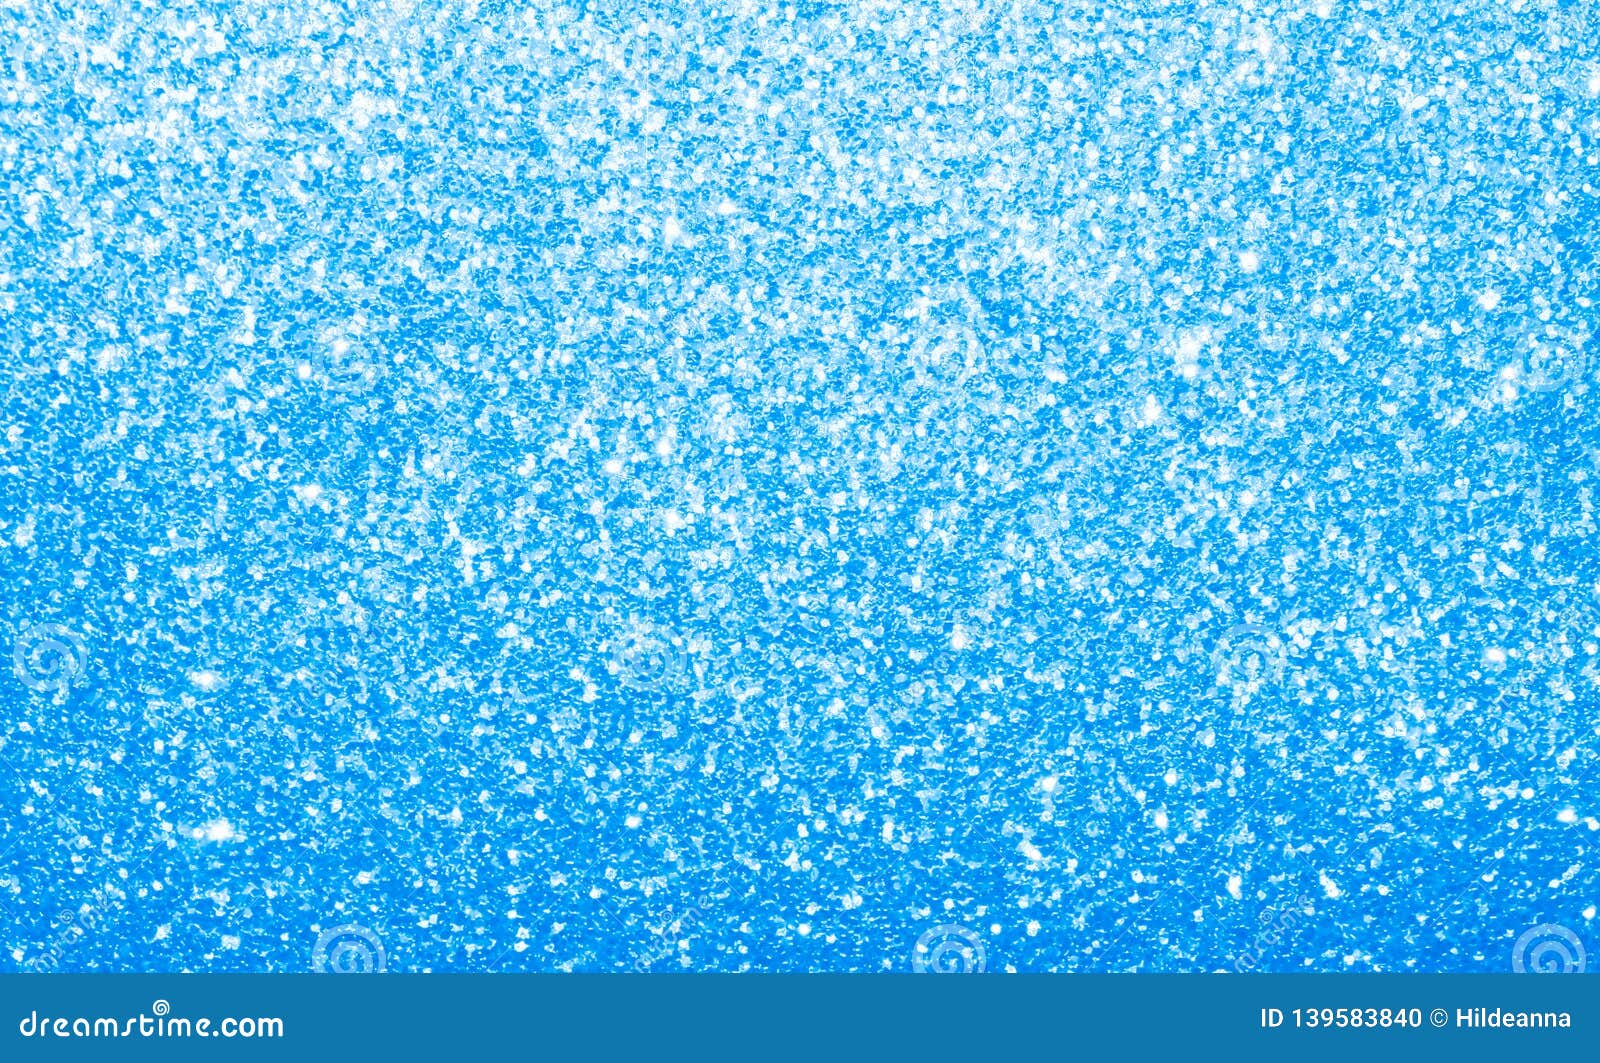 121,100 Light Blue Glitter Photos - Free & Stock Photos from Dreamstime